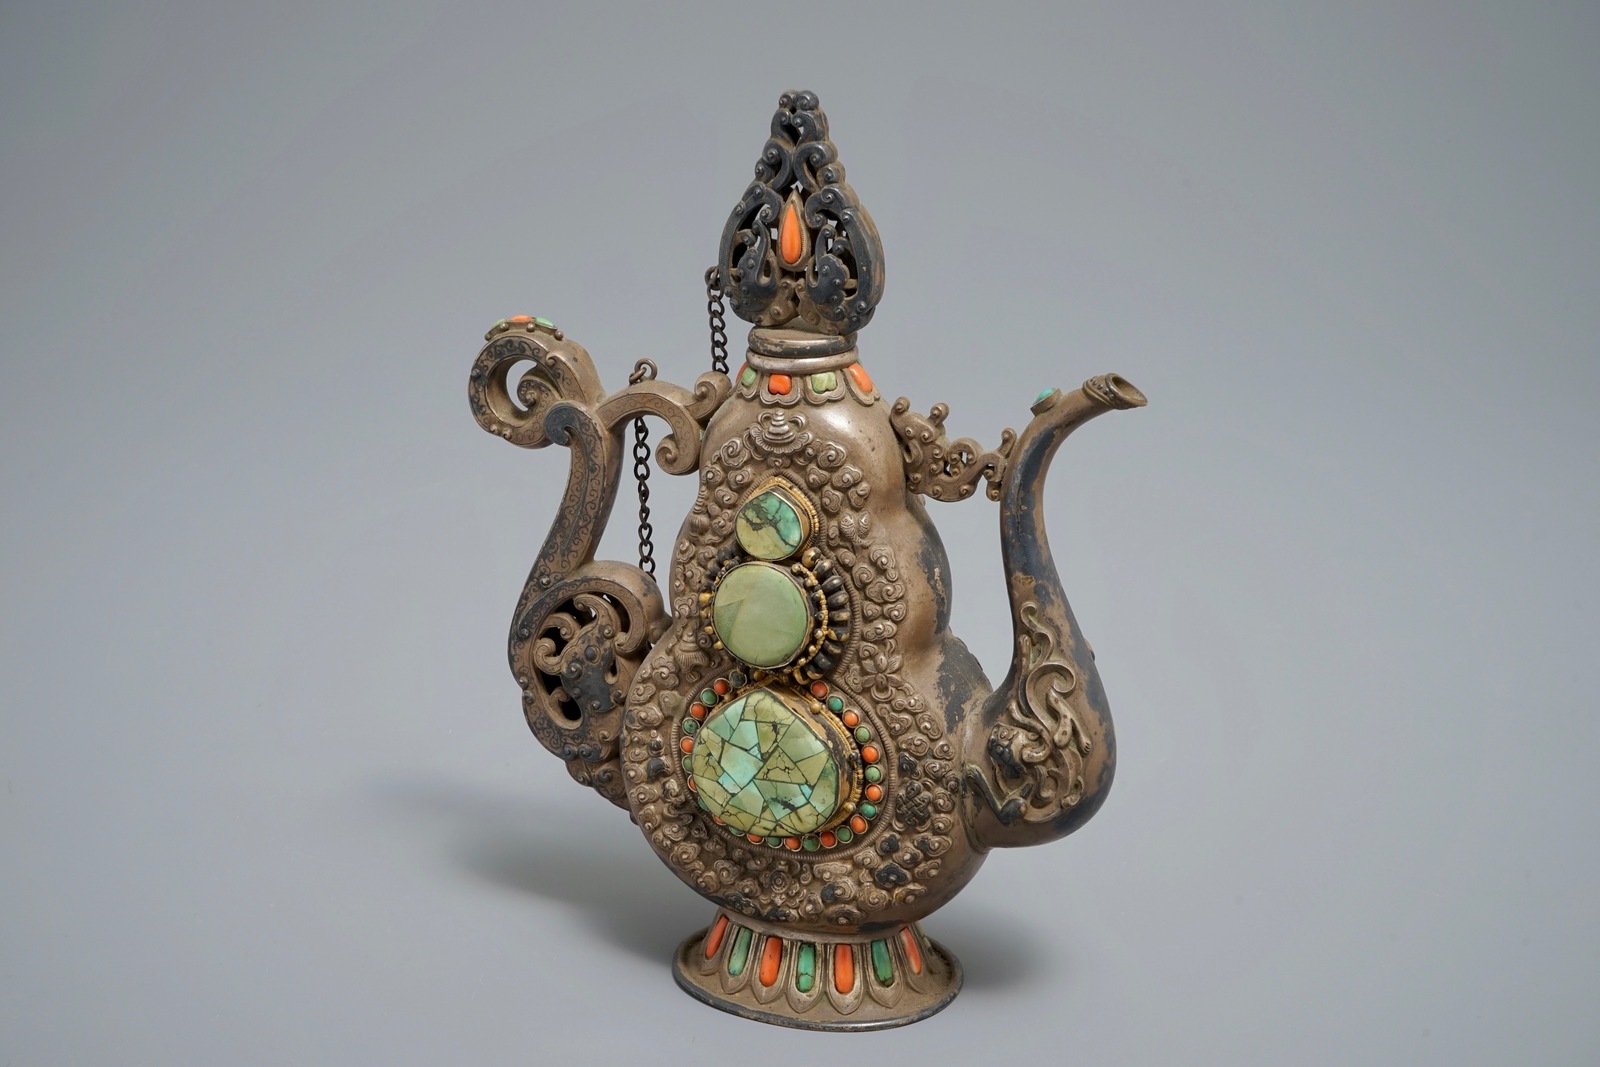 A silverd and parcel-gilt brass jug inlaid with turquoise and coral, Tibet or Mongolia, 19th C.